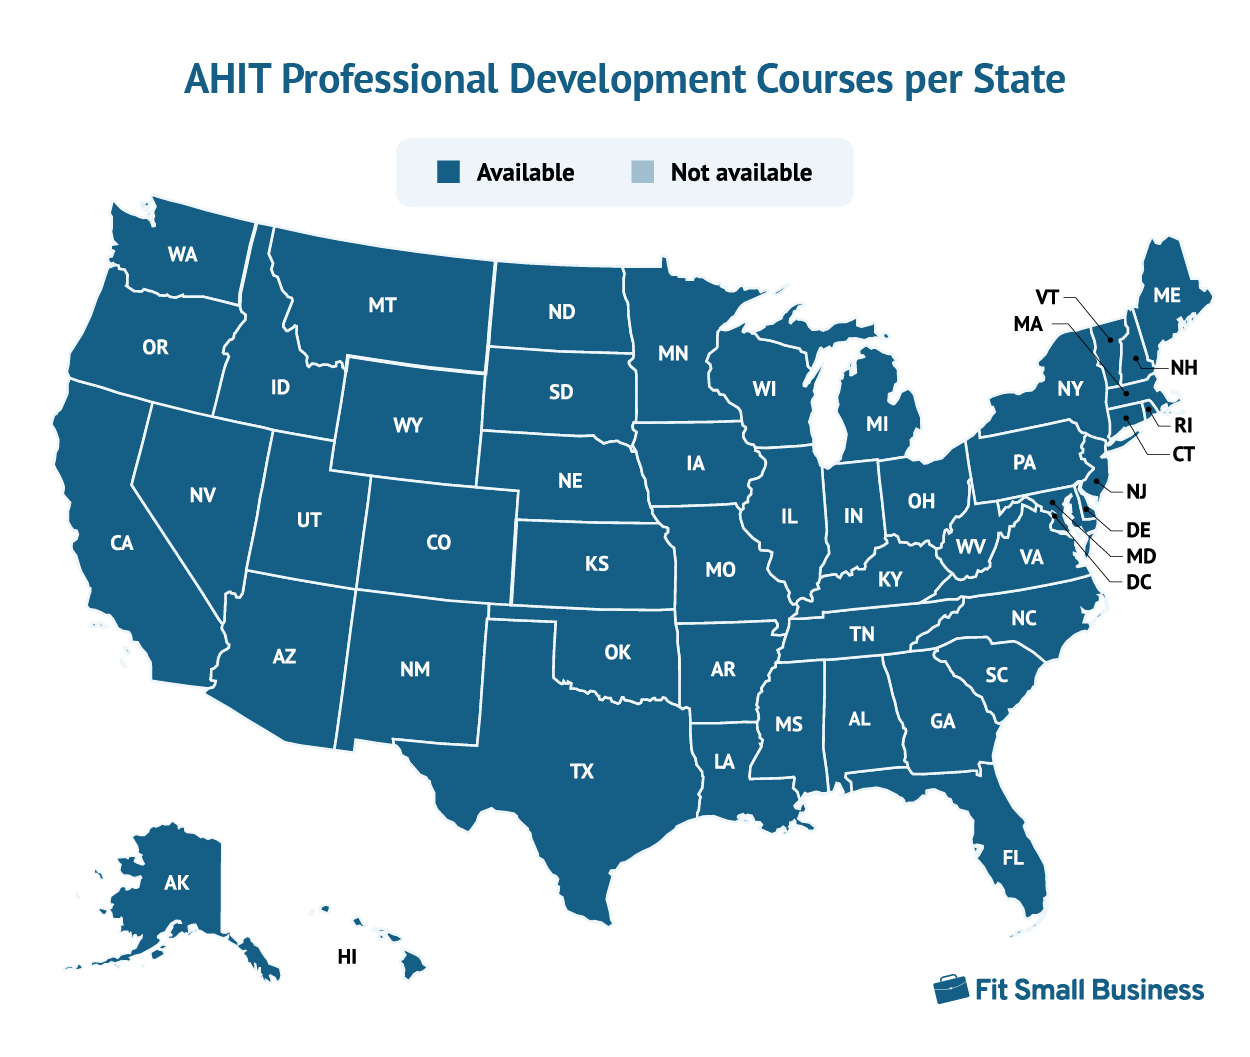 The map showing for a AHIT Professional Development Courses per State.